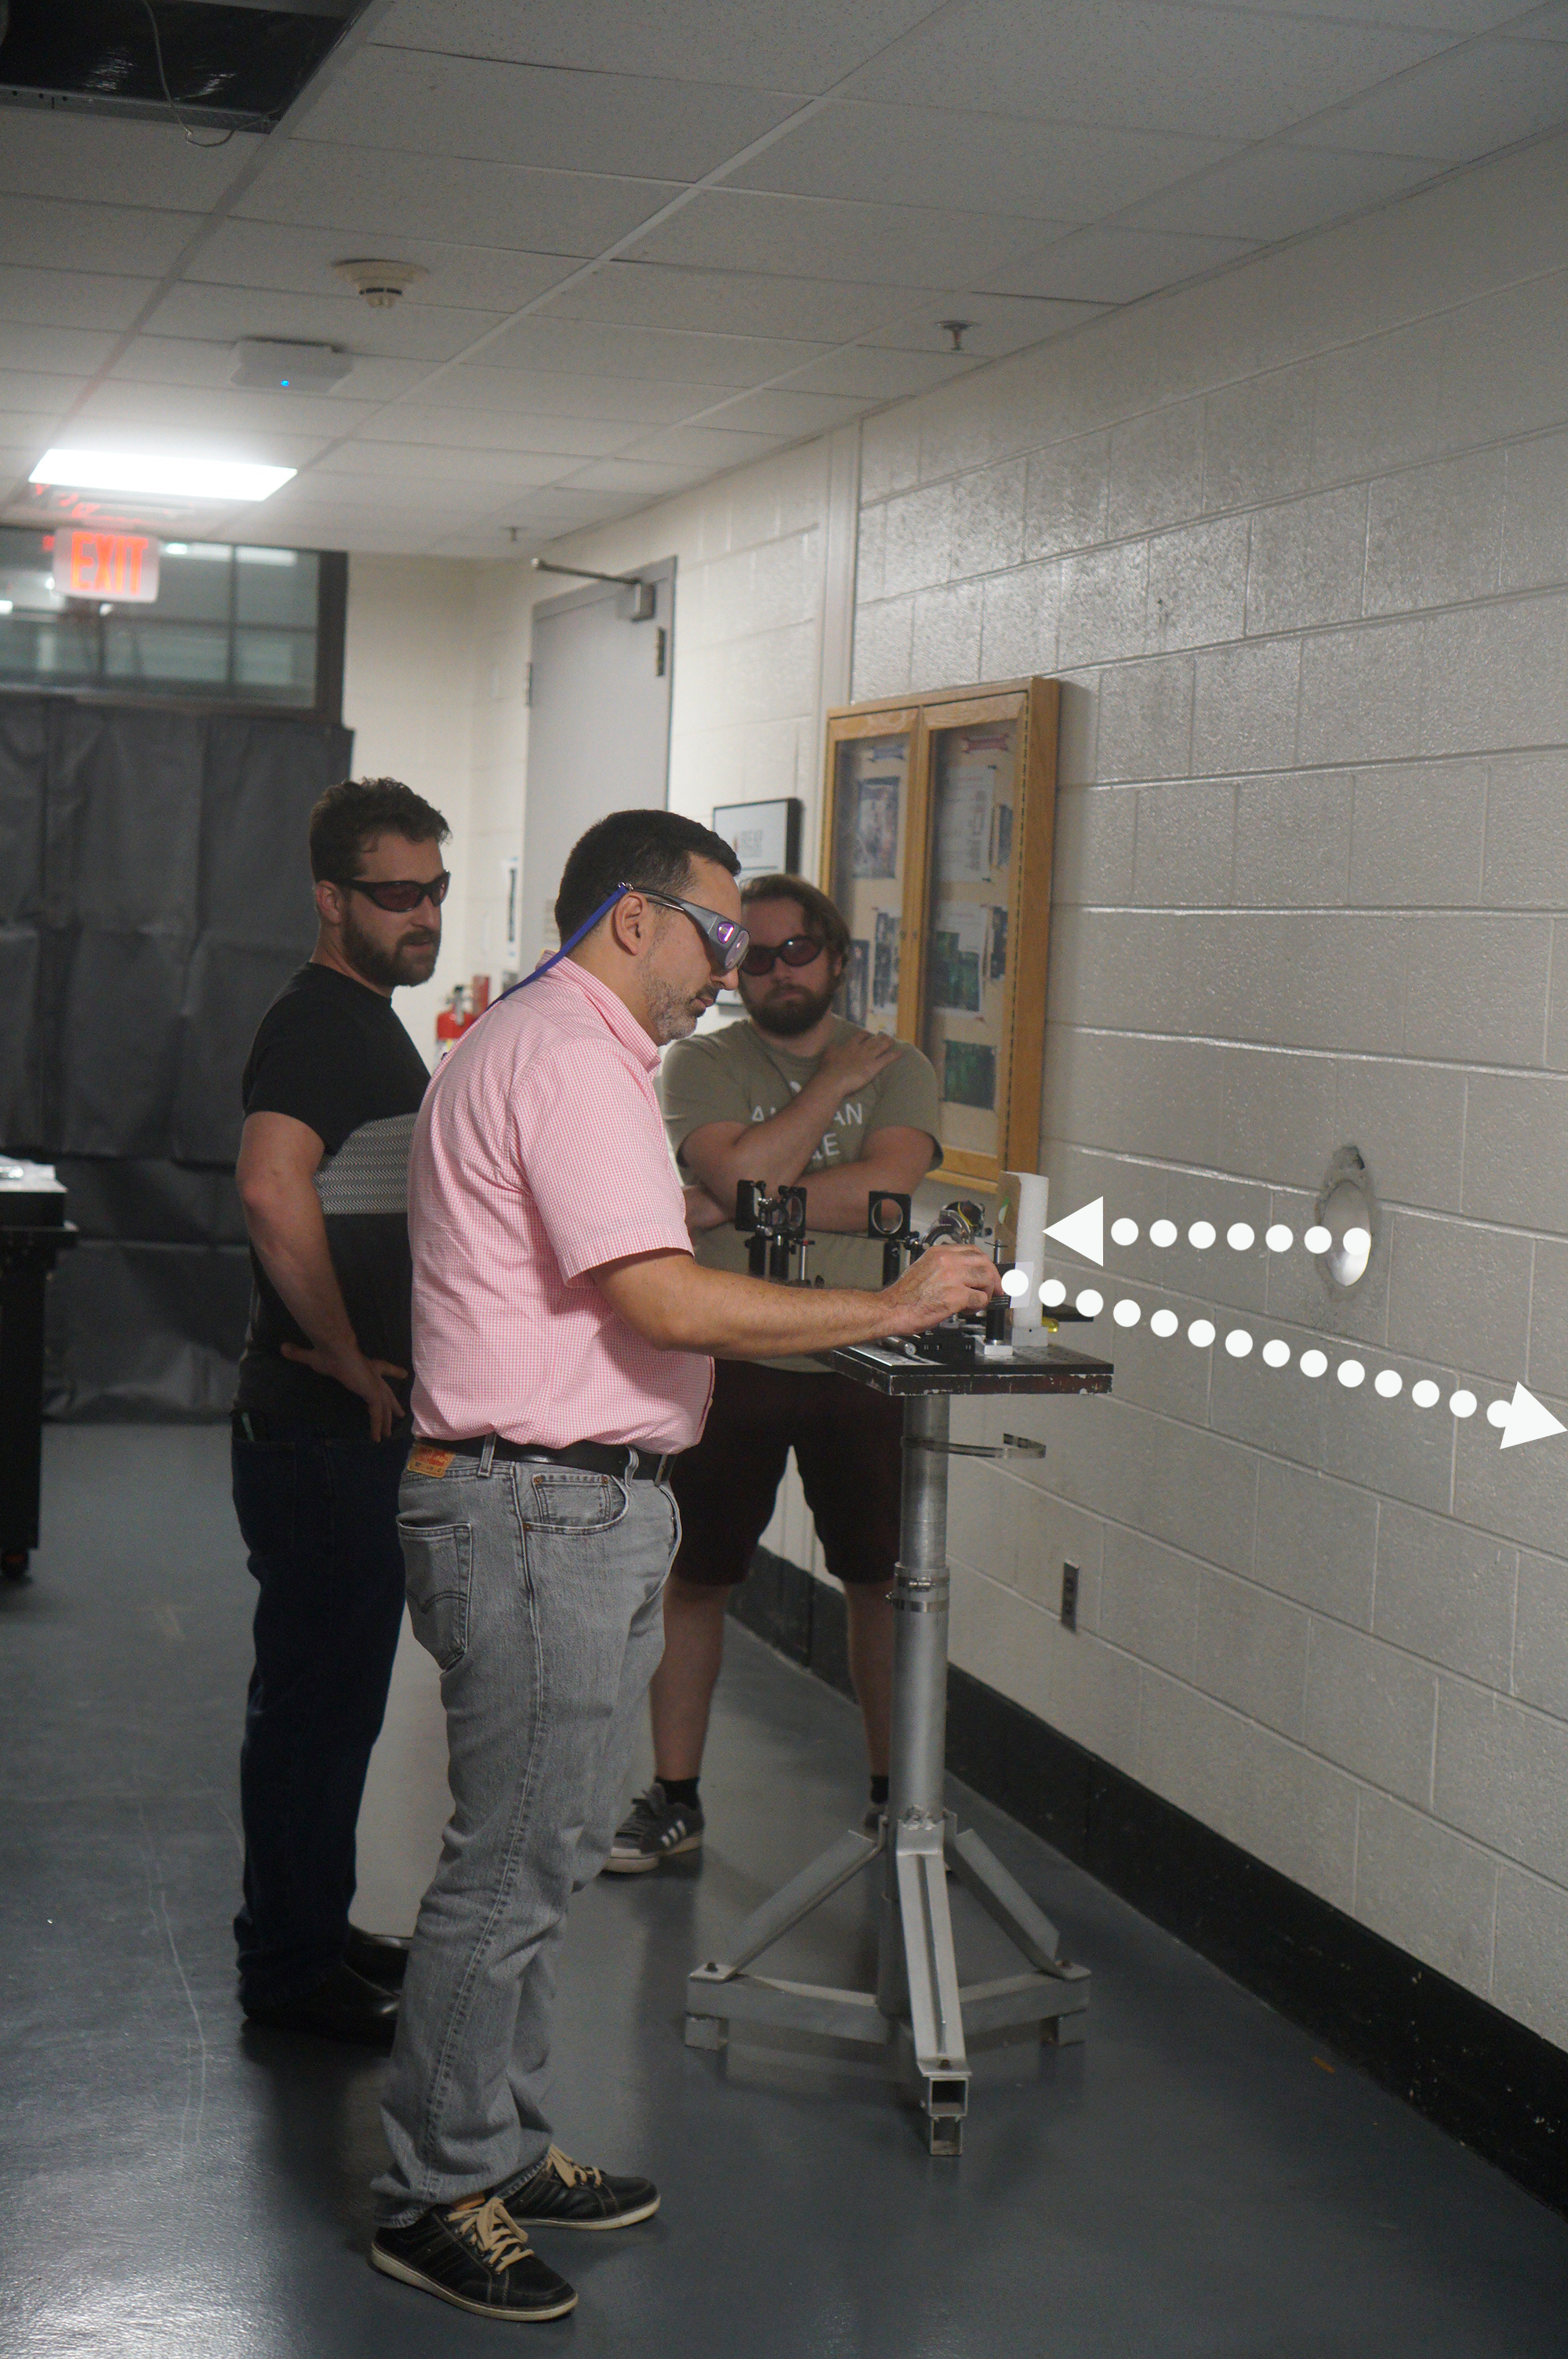  Left to right Eric Rosenthal, a physicist at the U.S. Naval Research Laboratory; Anthony Valenzuela, a physicist at the U.S. Army Research Lab; and Goffin align optics at a porthole in the wall in order to send the laser beam from the lab down the hallway. The white dotted lines show the approximate beam path before and after the optics redirected it. 